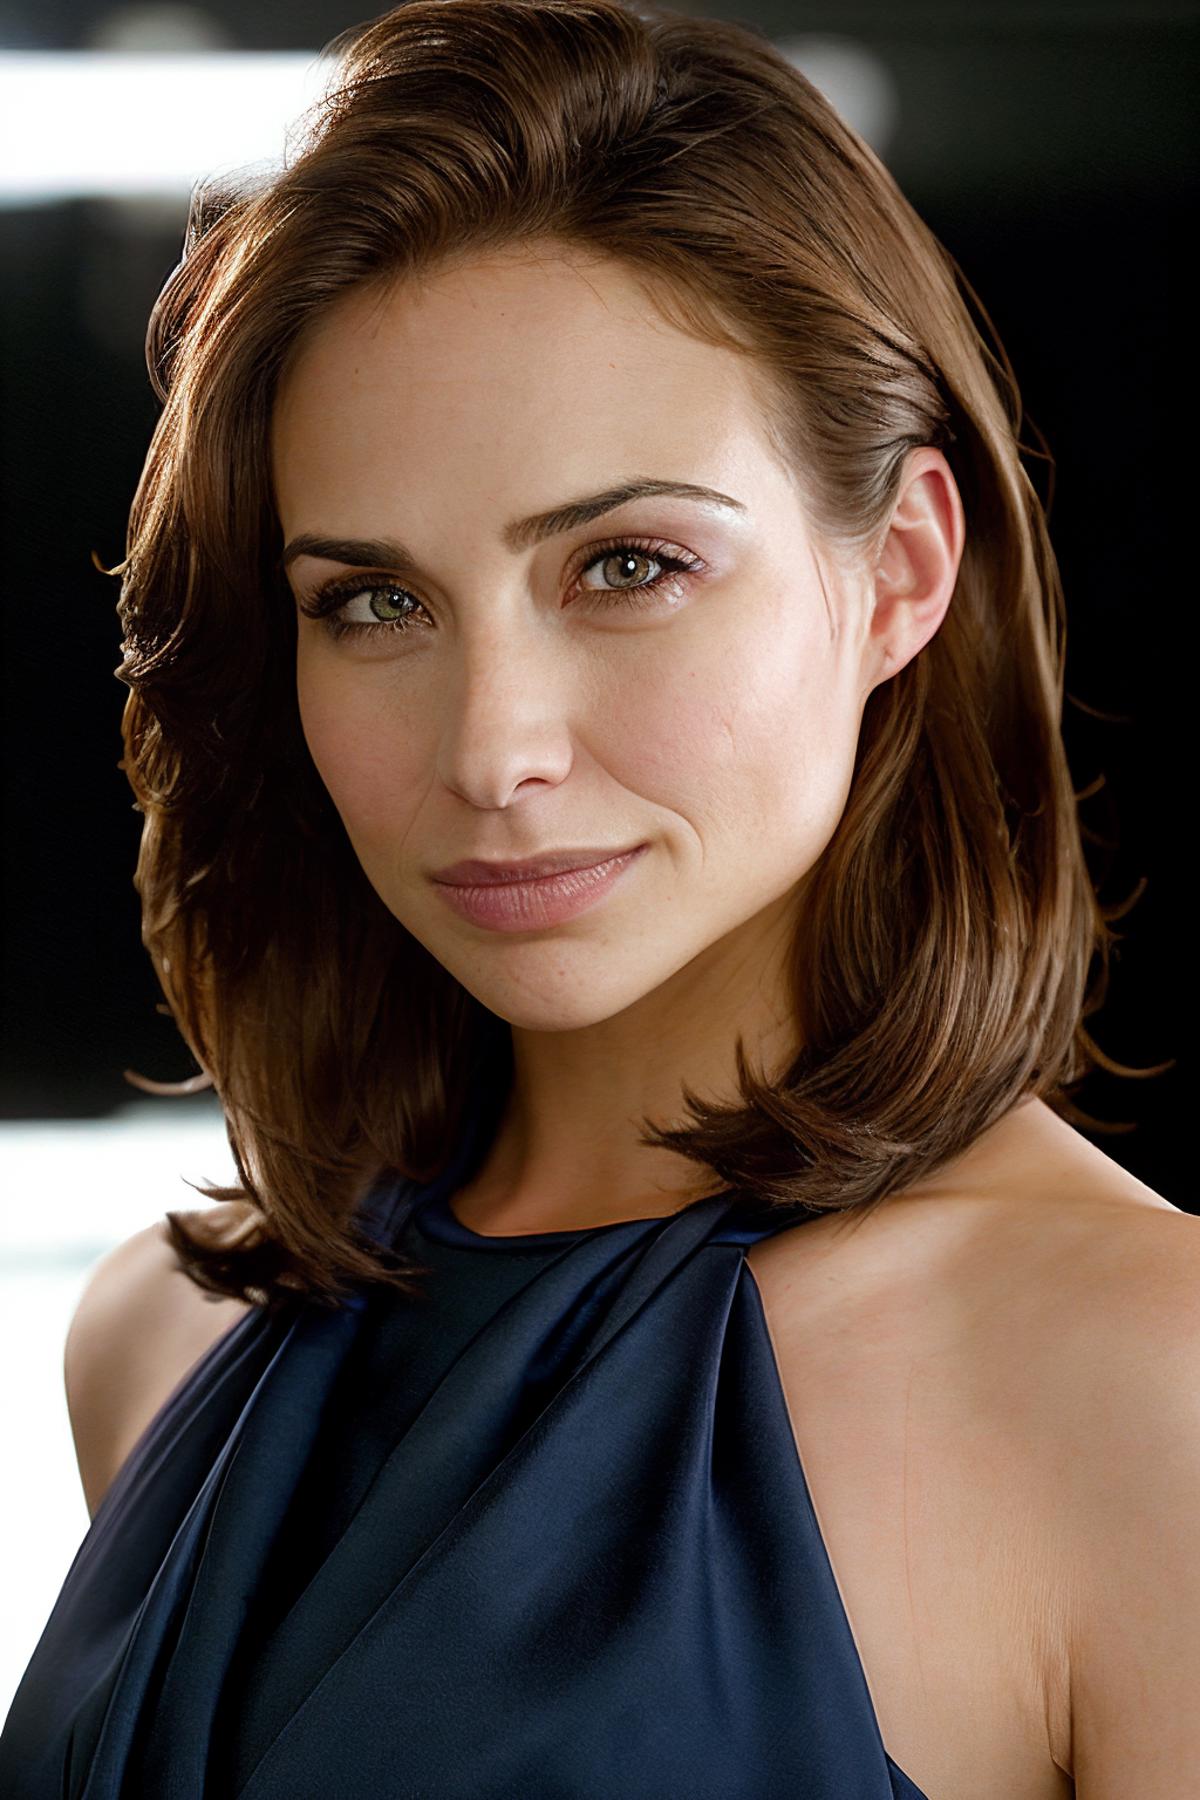 Claire Forlani image by astragartist